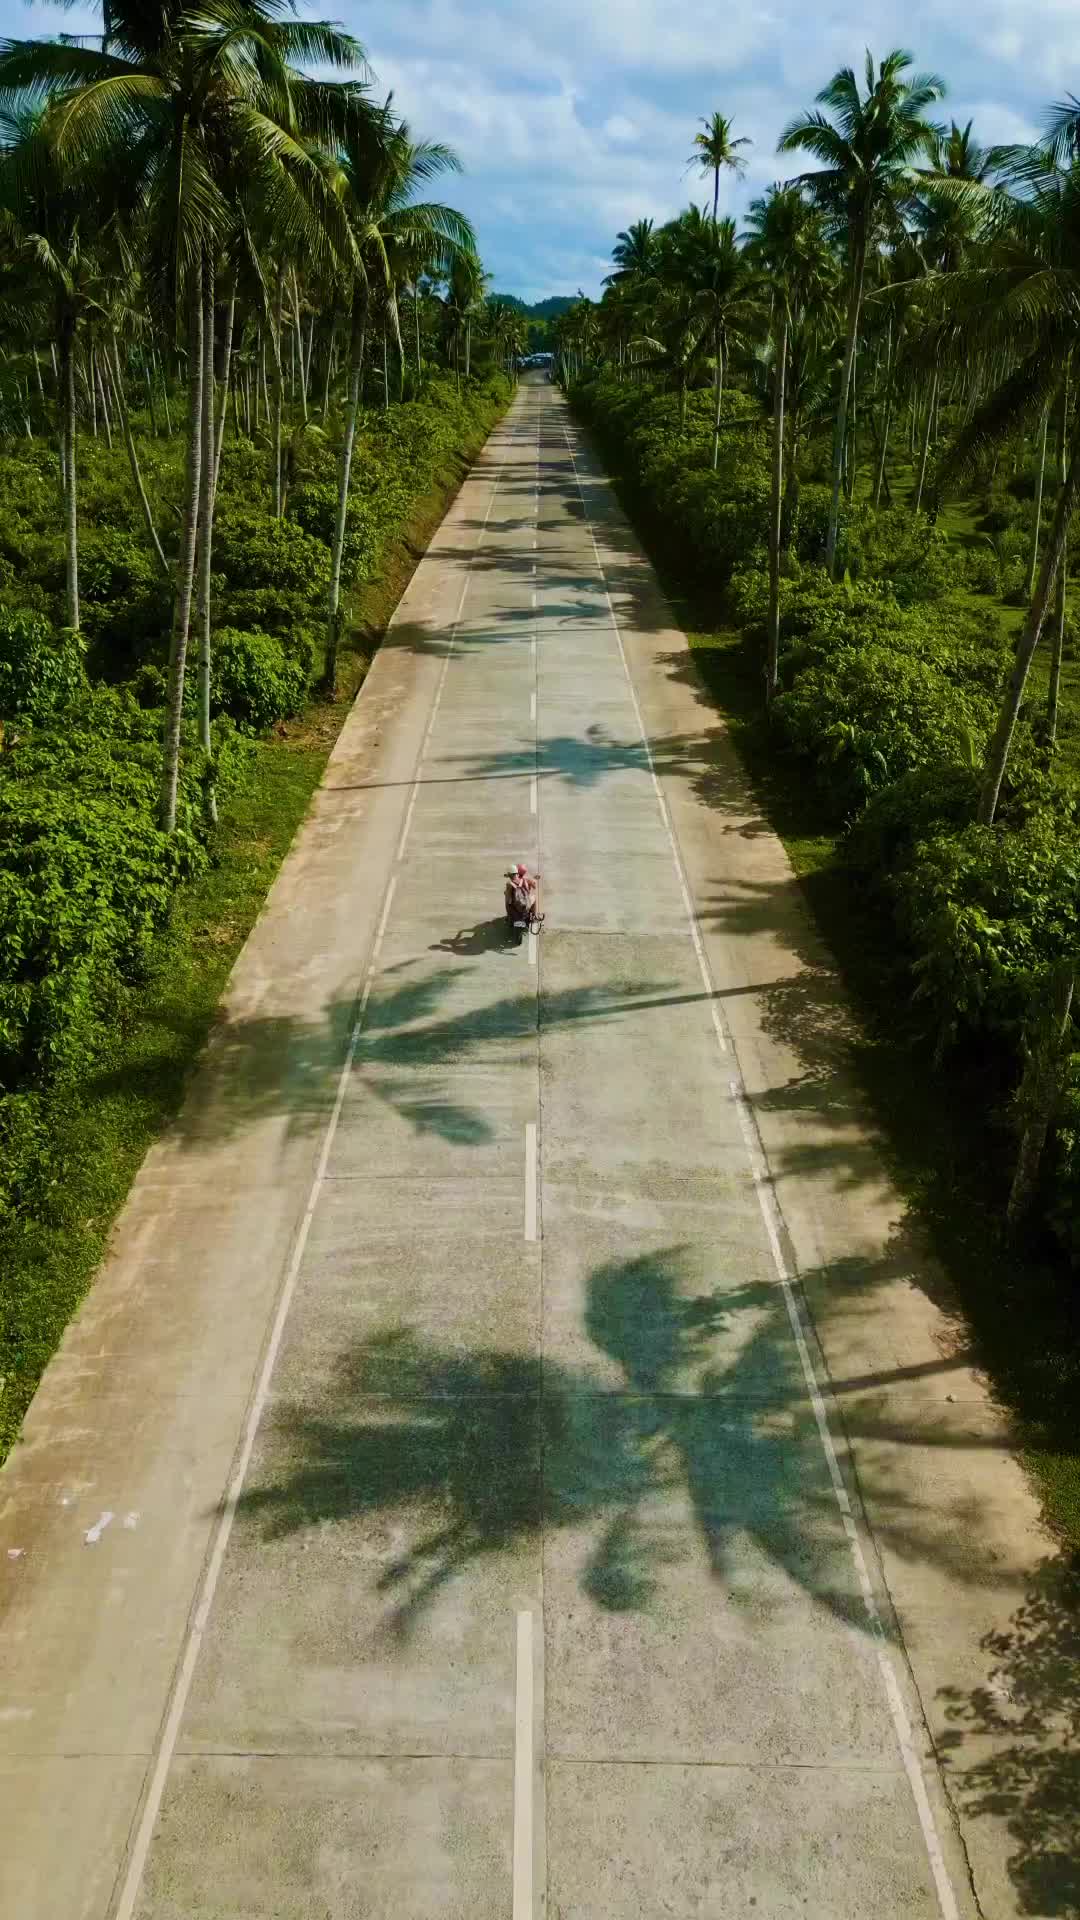 Driving on Coconut Road in Siargao Paradise